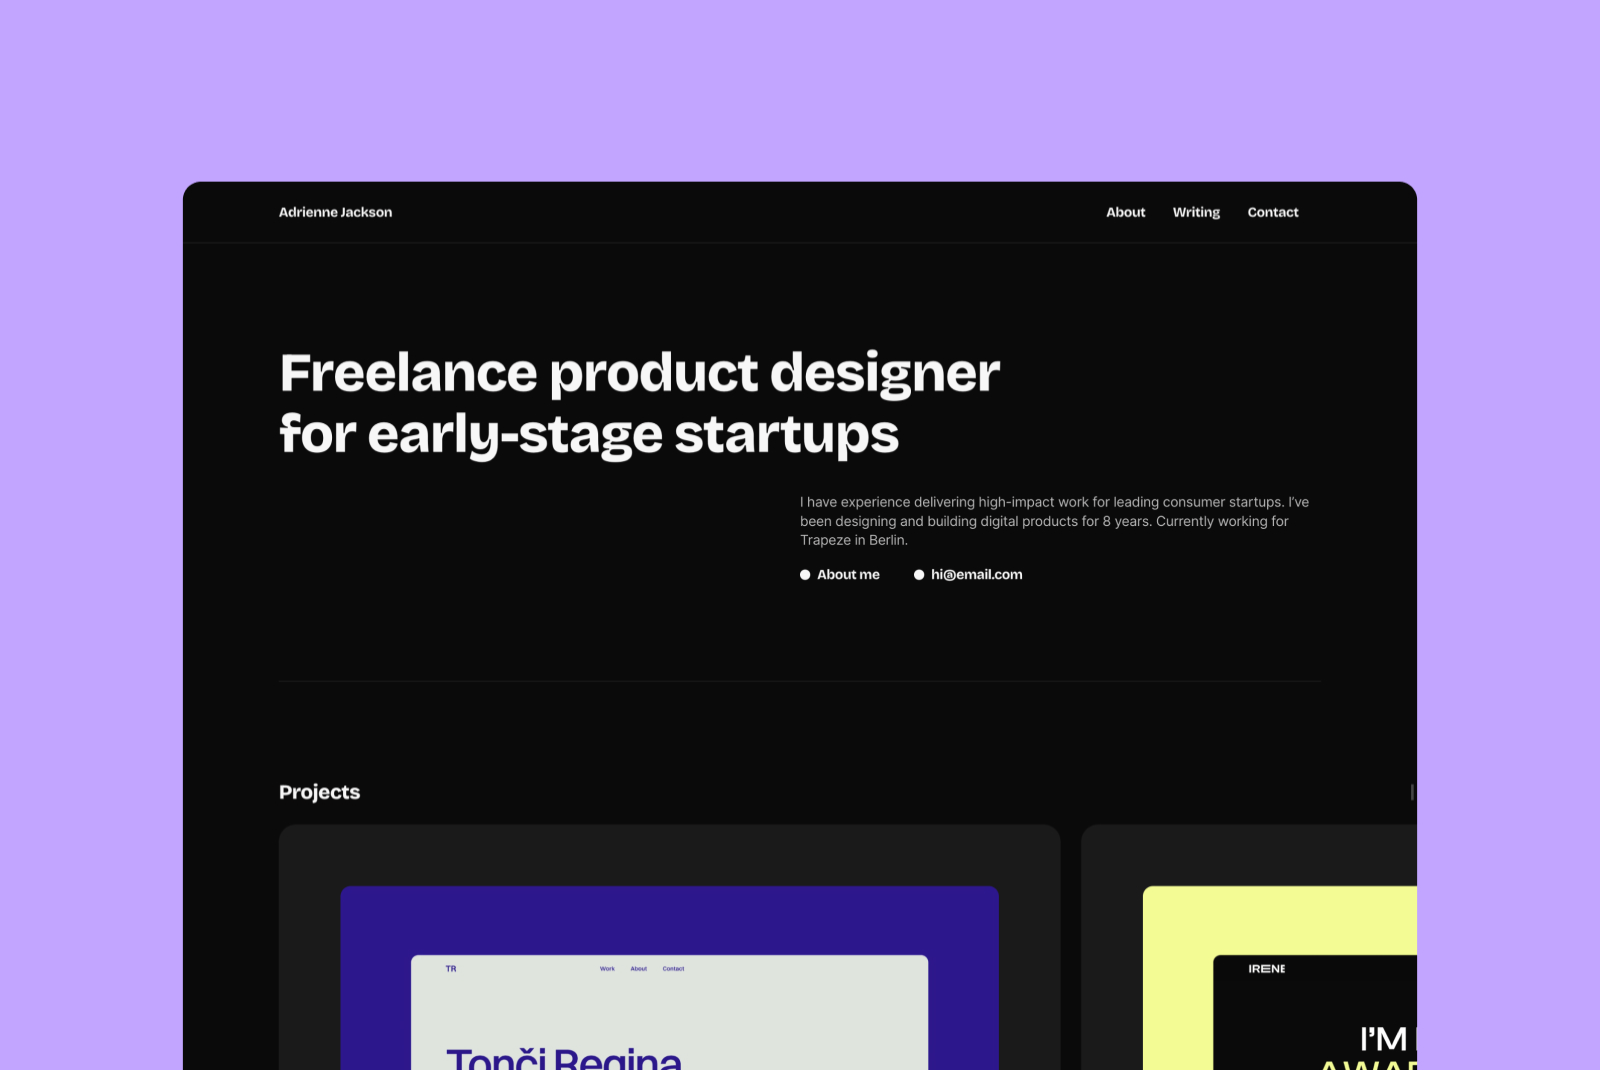 Freelance product designer portfolio template with a clean layout for UI/UX designers targeting startups, includes project mockups and contact info.